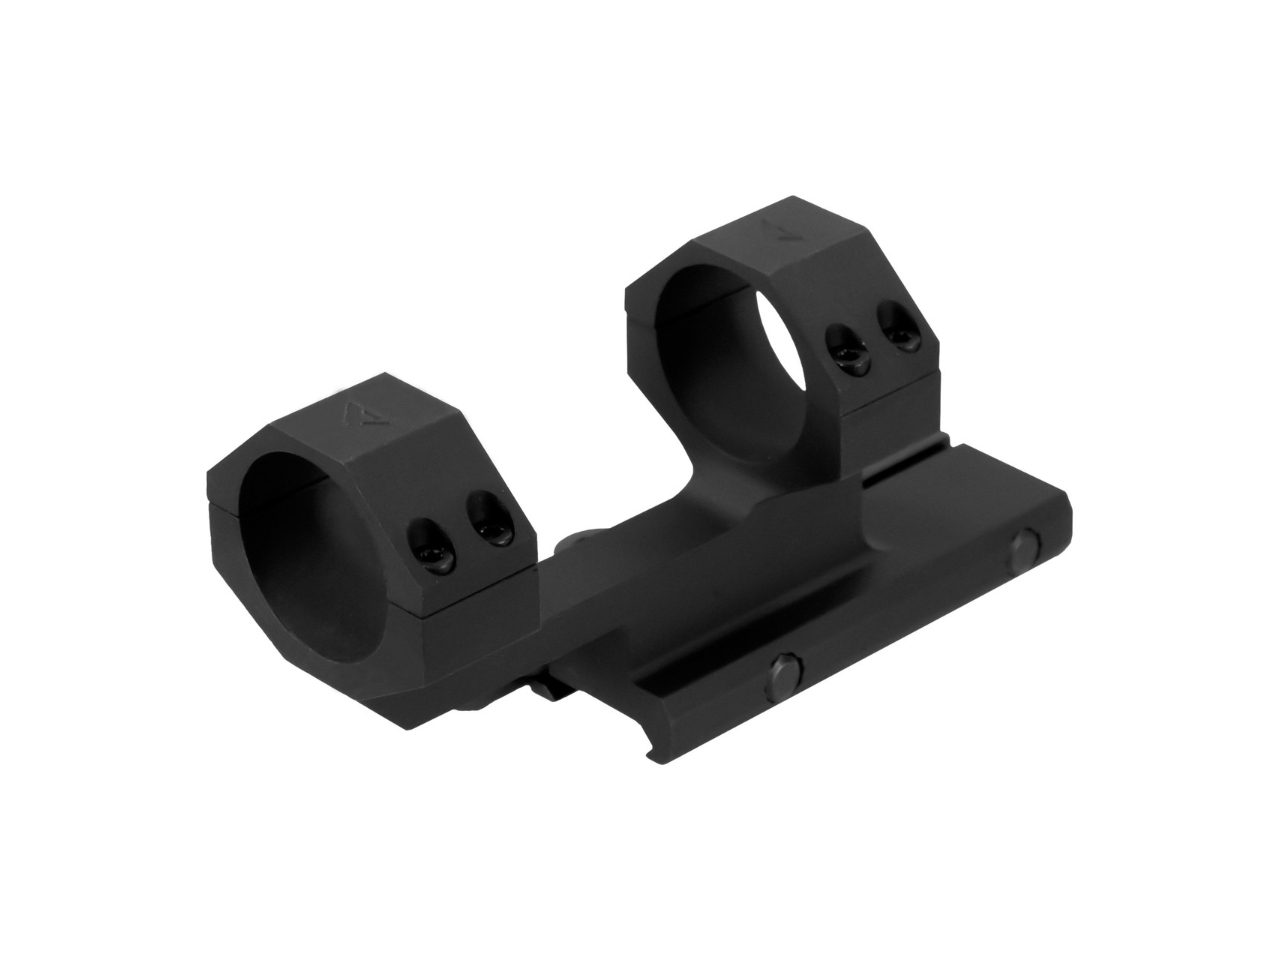 AIM 30mm QD Cantilever Scope Mount 1.75" Height